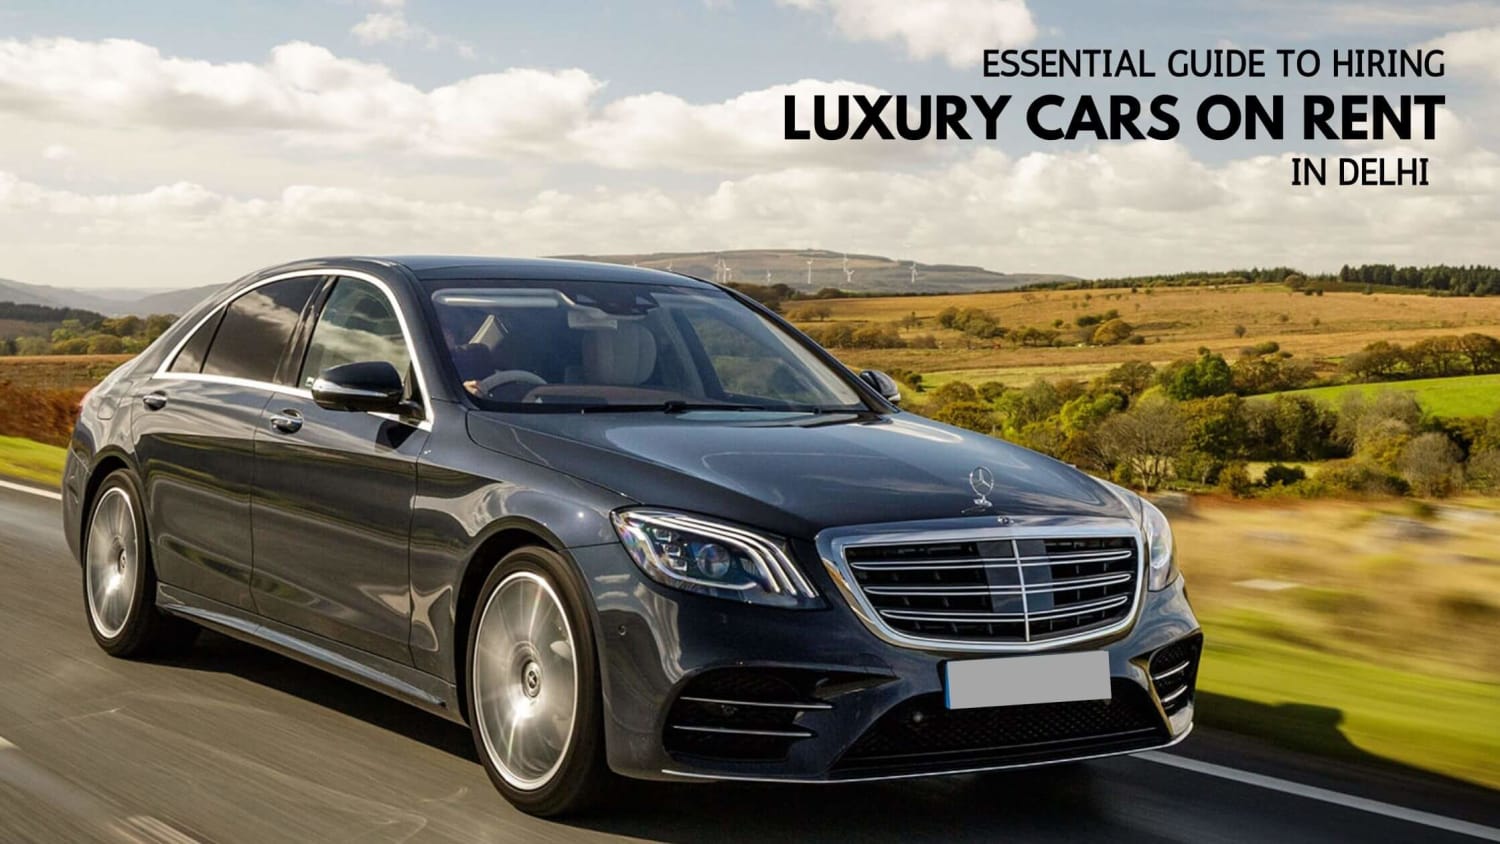 Essential Guide to Hire Luxury Cars on Rent in Delhi